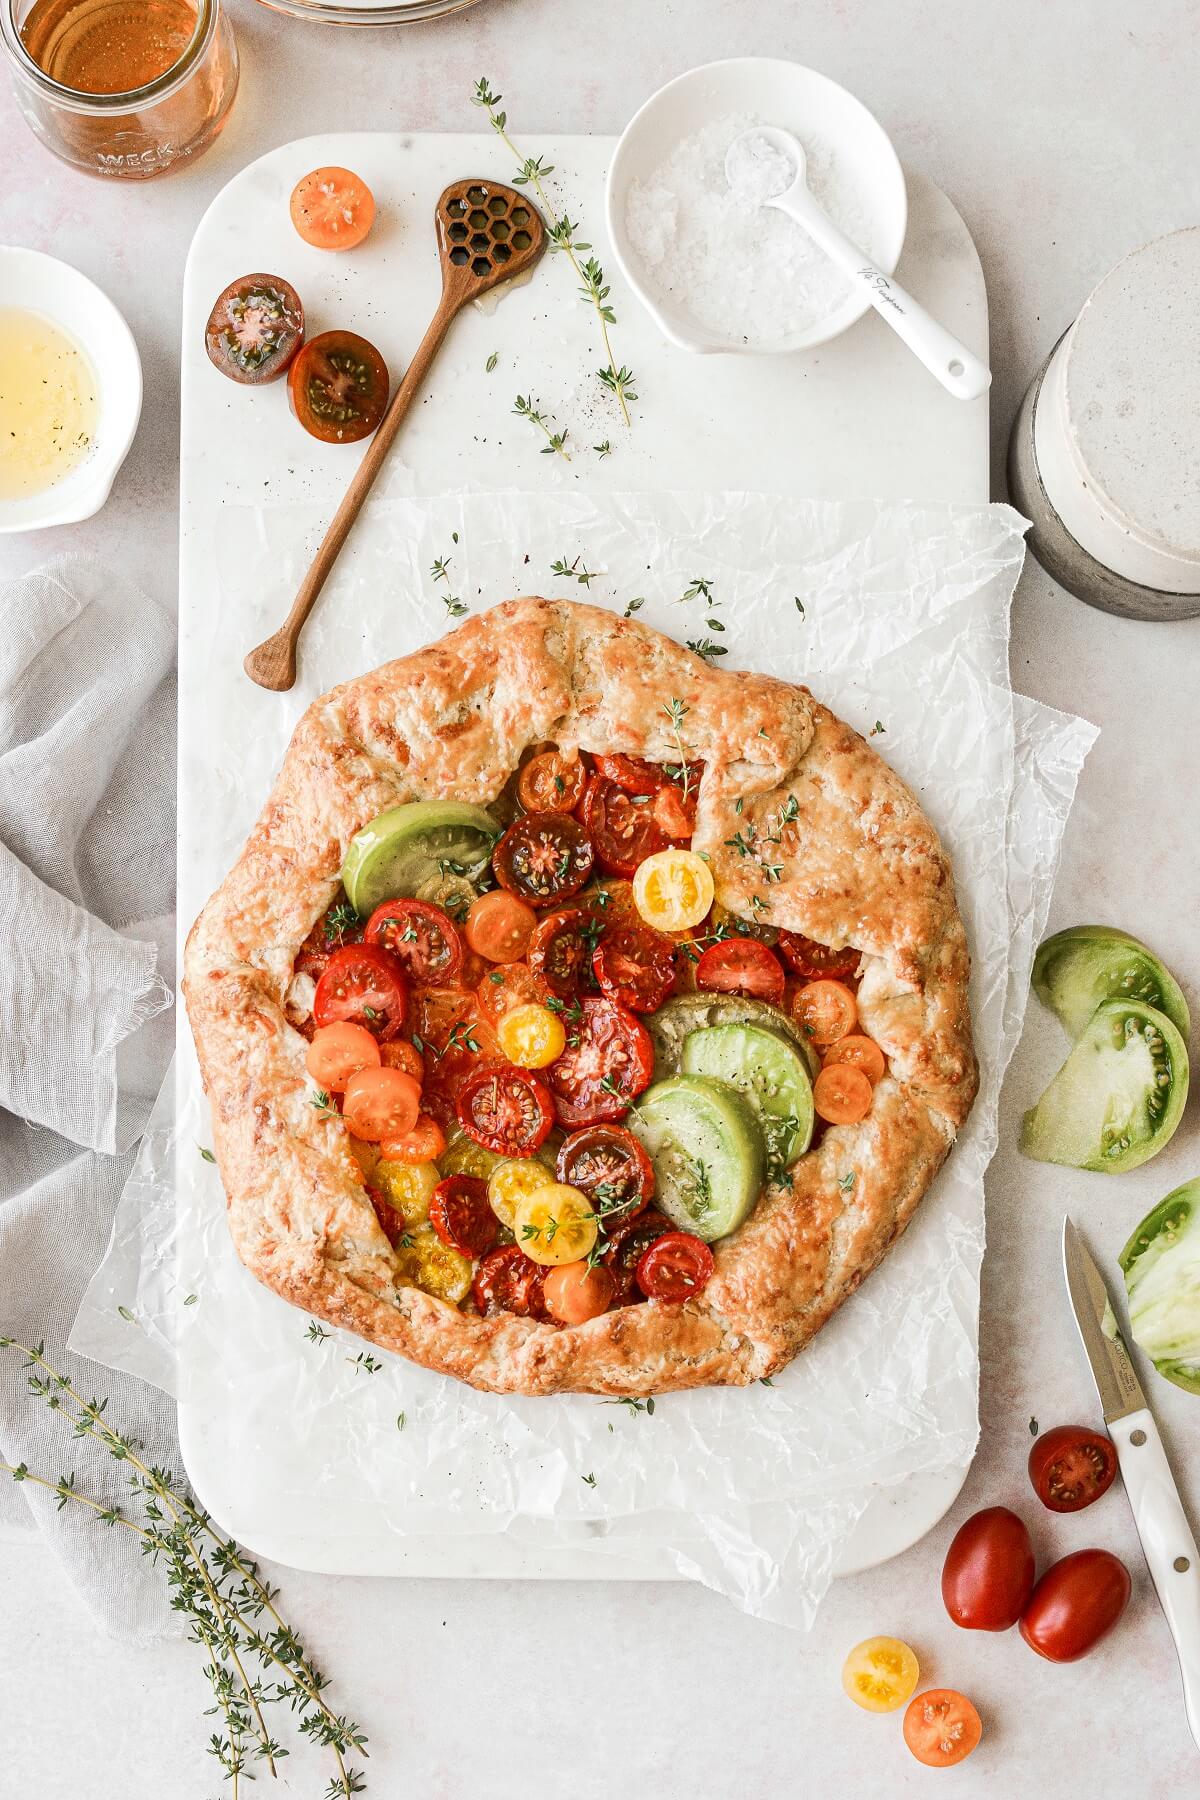 A tomato galette made with heirloom tomatoes on a white marble serving board.